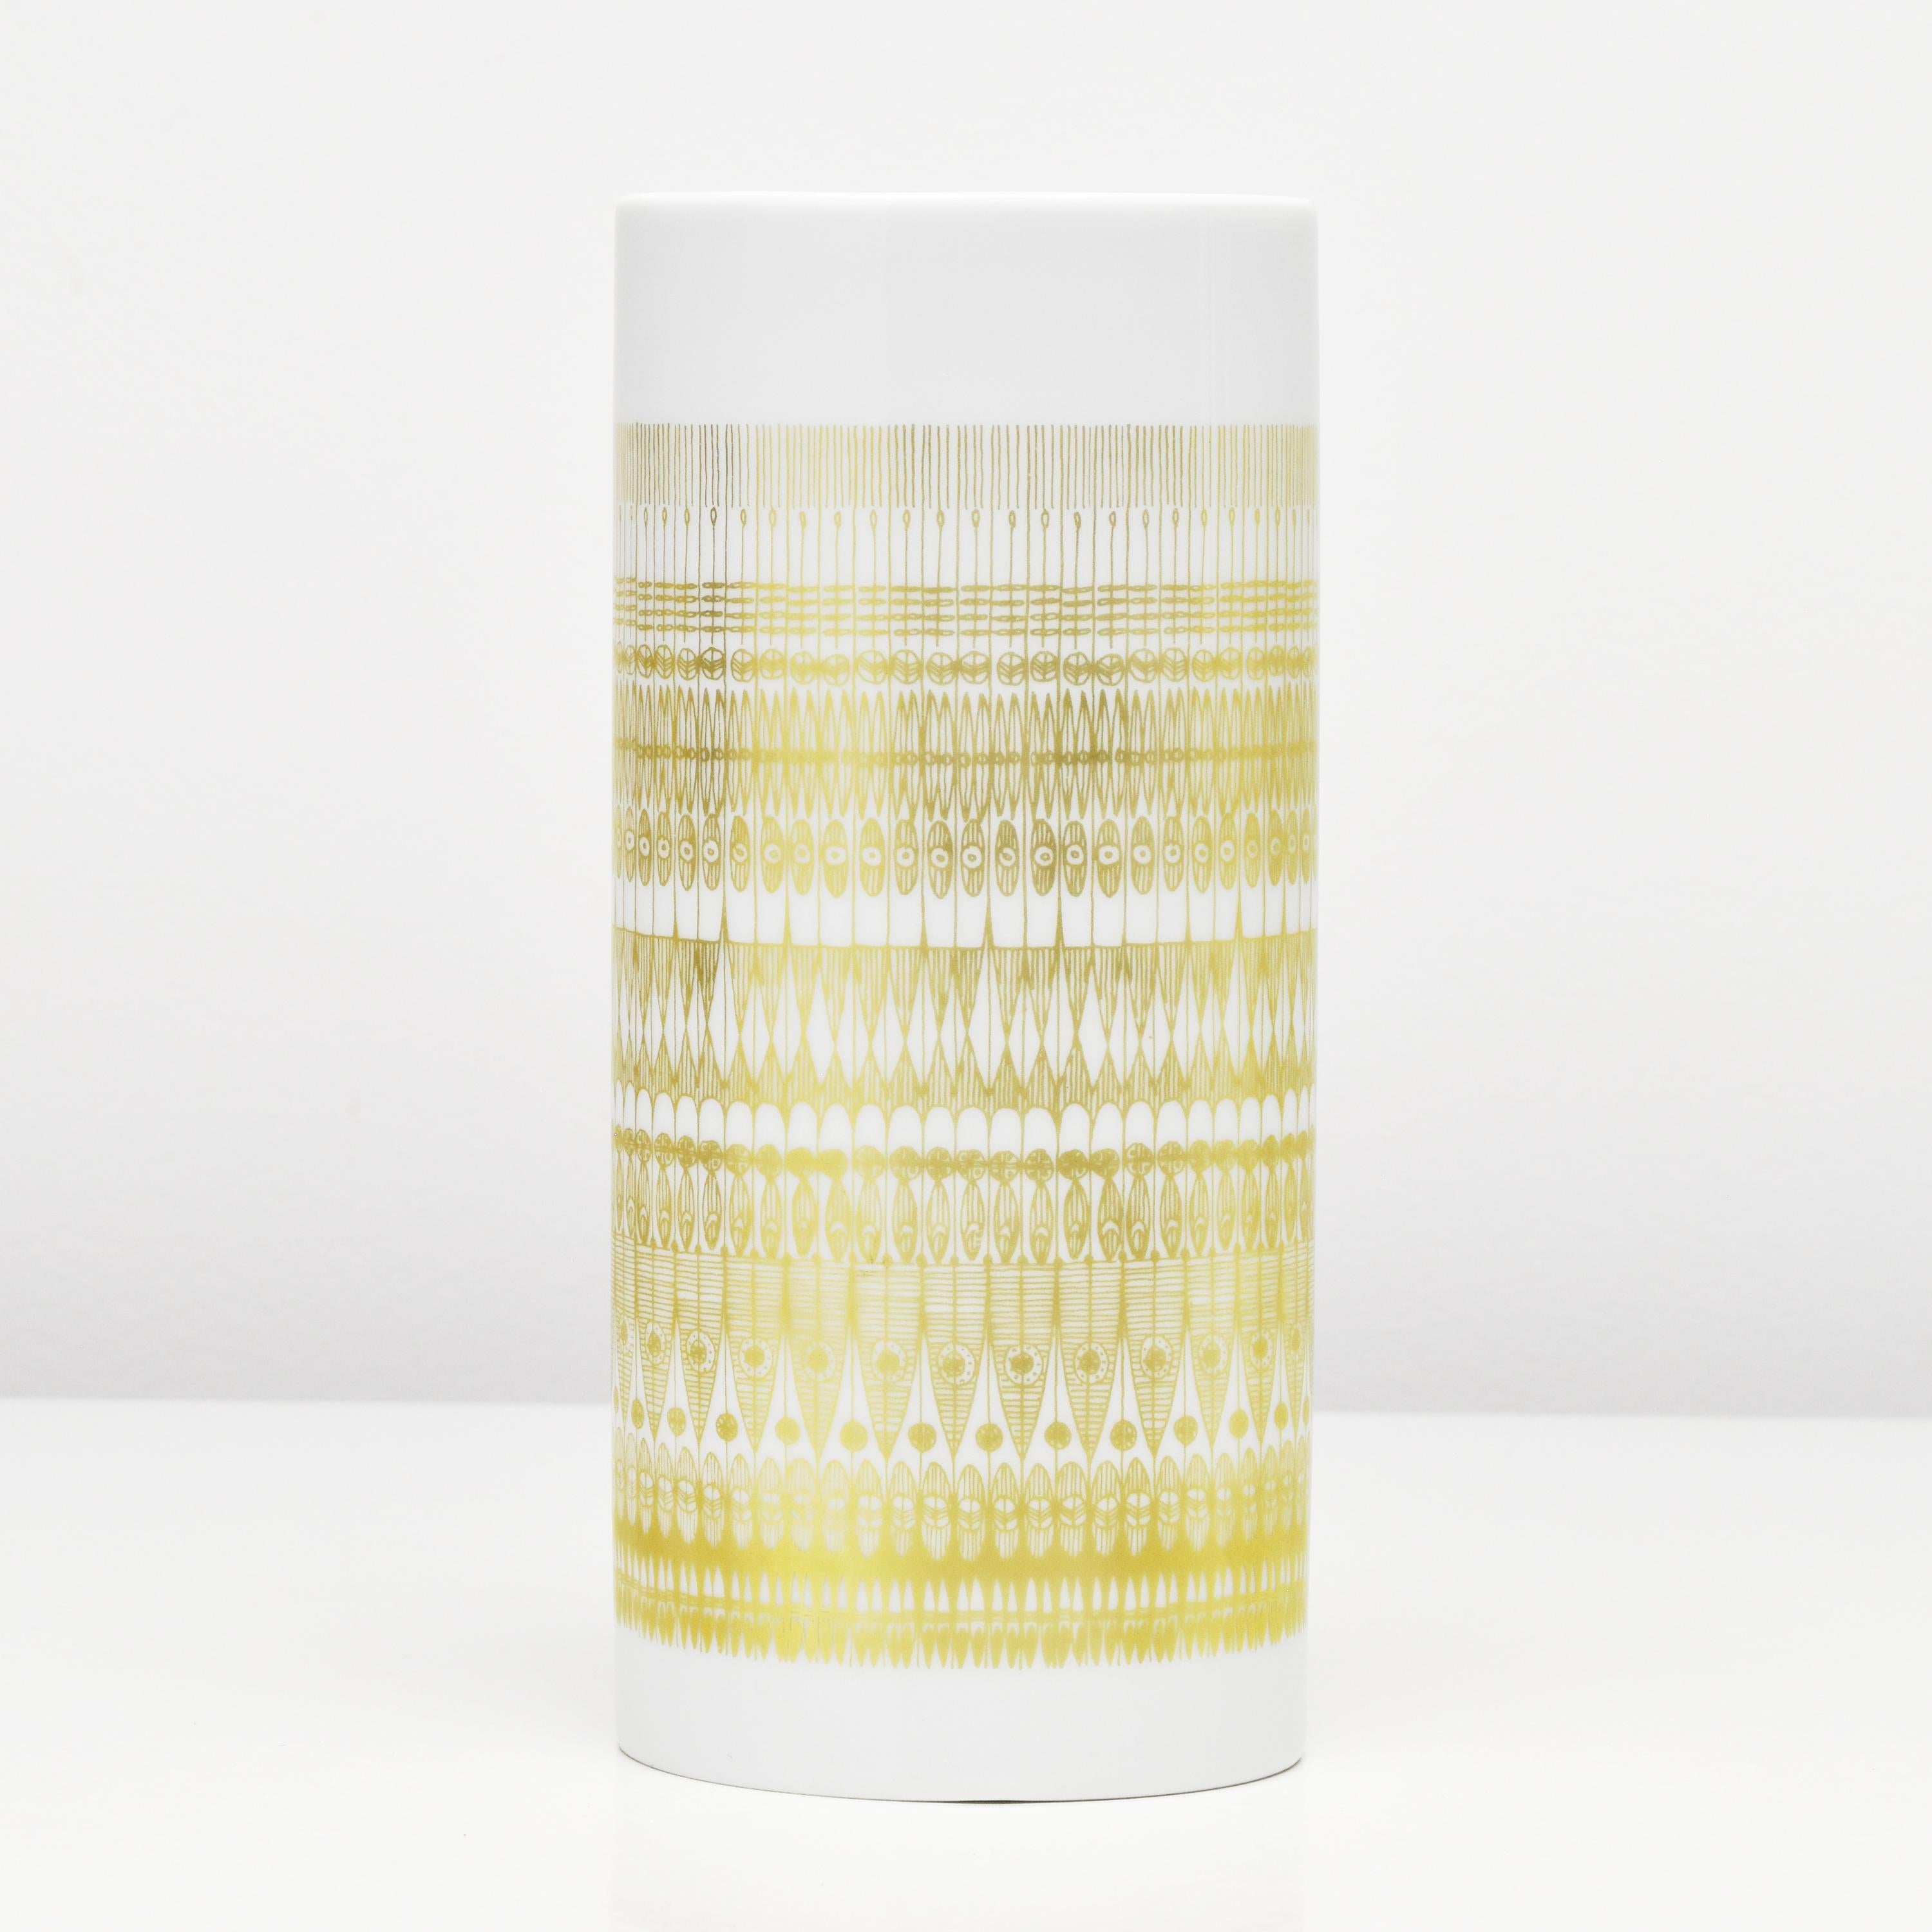 An elegant porcelain vase designed by Hans Theo Baumann for Rosenthal. The vase has an oval shape, with a glossy glaze that creates a smooth and polished surface, while the matte golden decor creates a subtle contrast and highlight the vase's